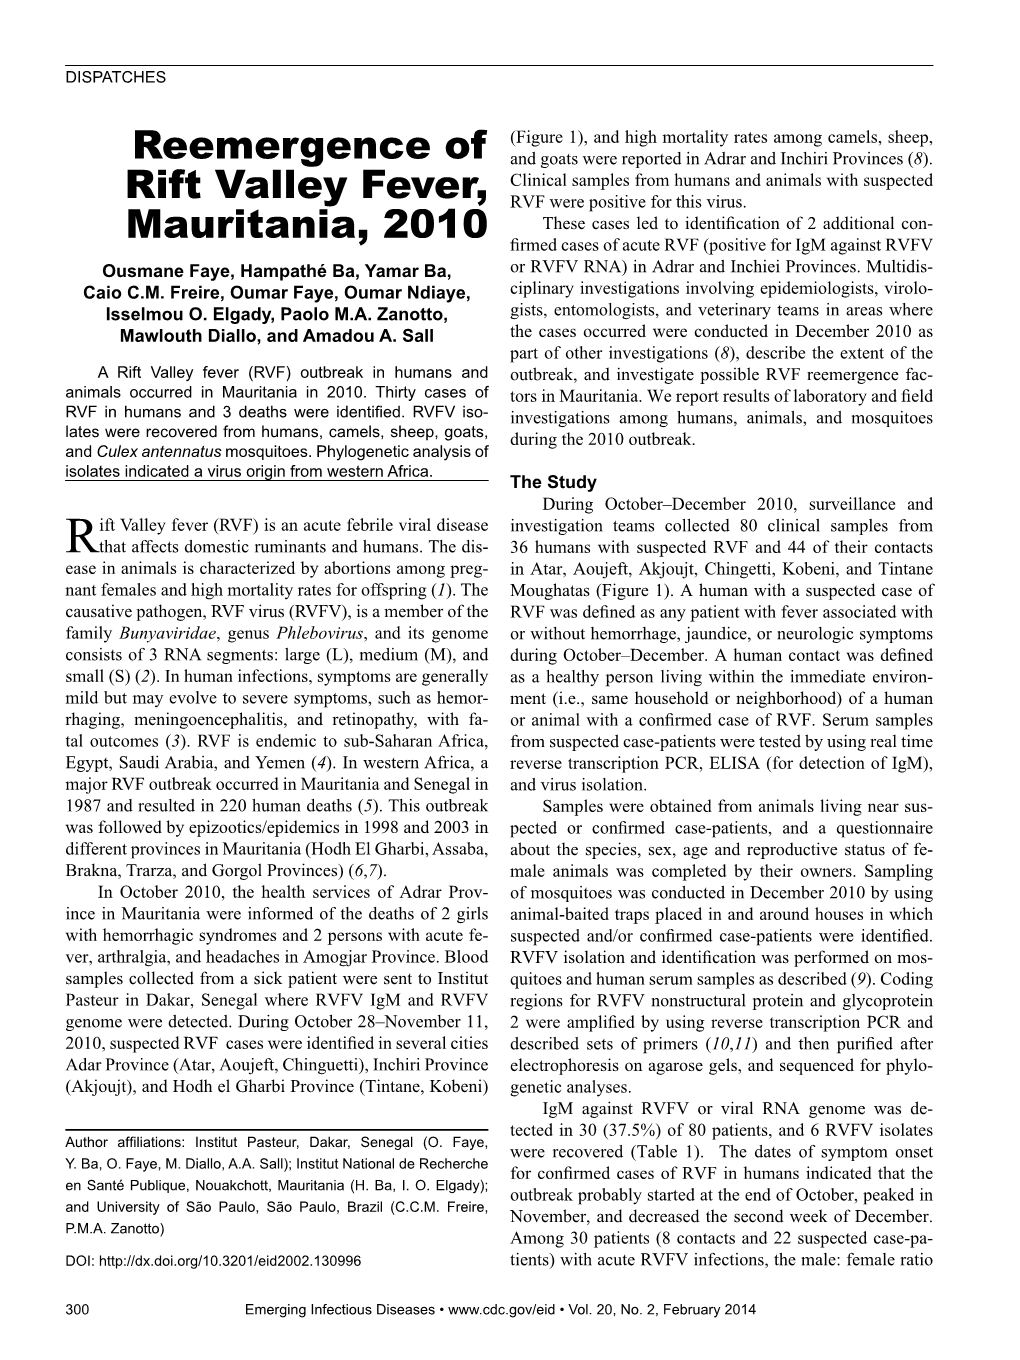 Reemergence of Rift Valley Fever, Mauritania, 2010